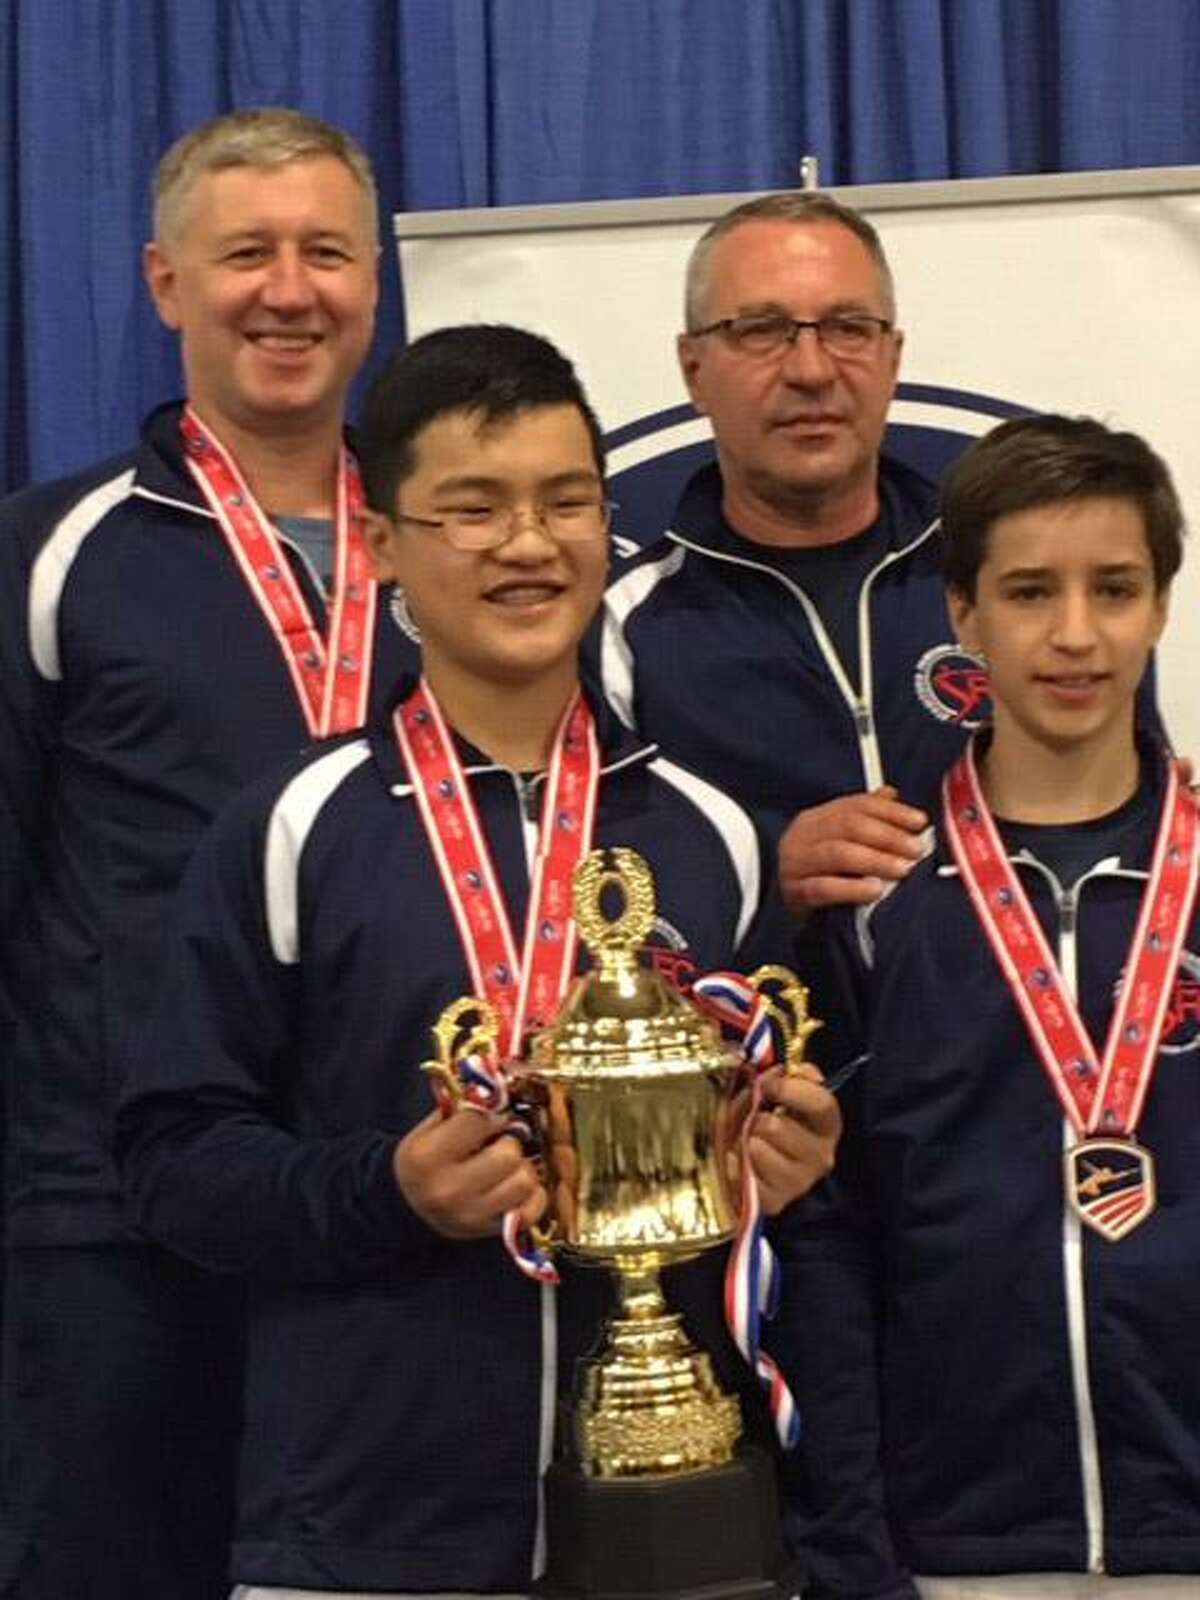 John Lin front row left, a Brunswick School student, and Nicky Wind gather at the 2017 National Fencing Championships held at Salt Lake City, Utah. Lin won the first-place medal in the sabre event, while Wind finished eighth. Pictured with them are coaches Alex Fotiyev, back row left, and Oleg Tretyak.